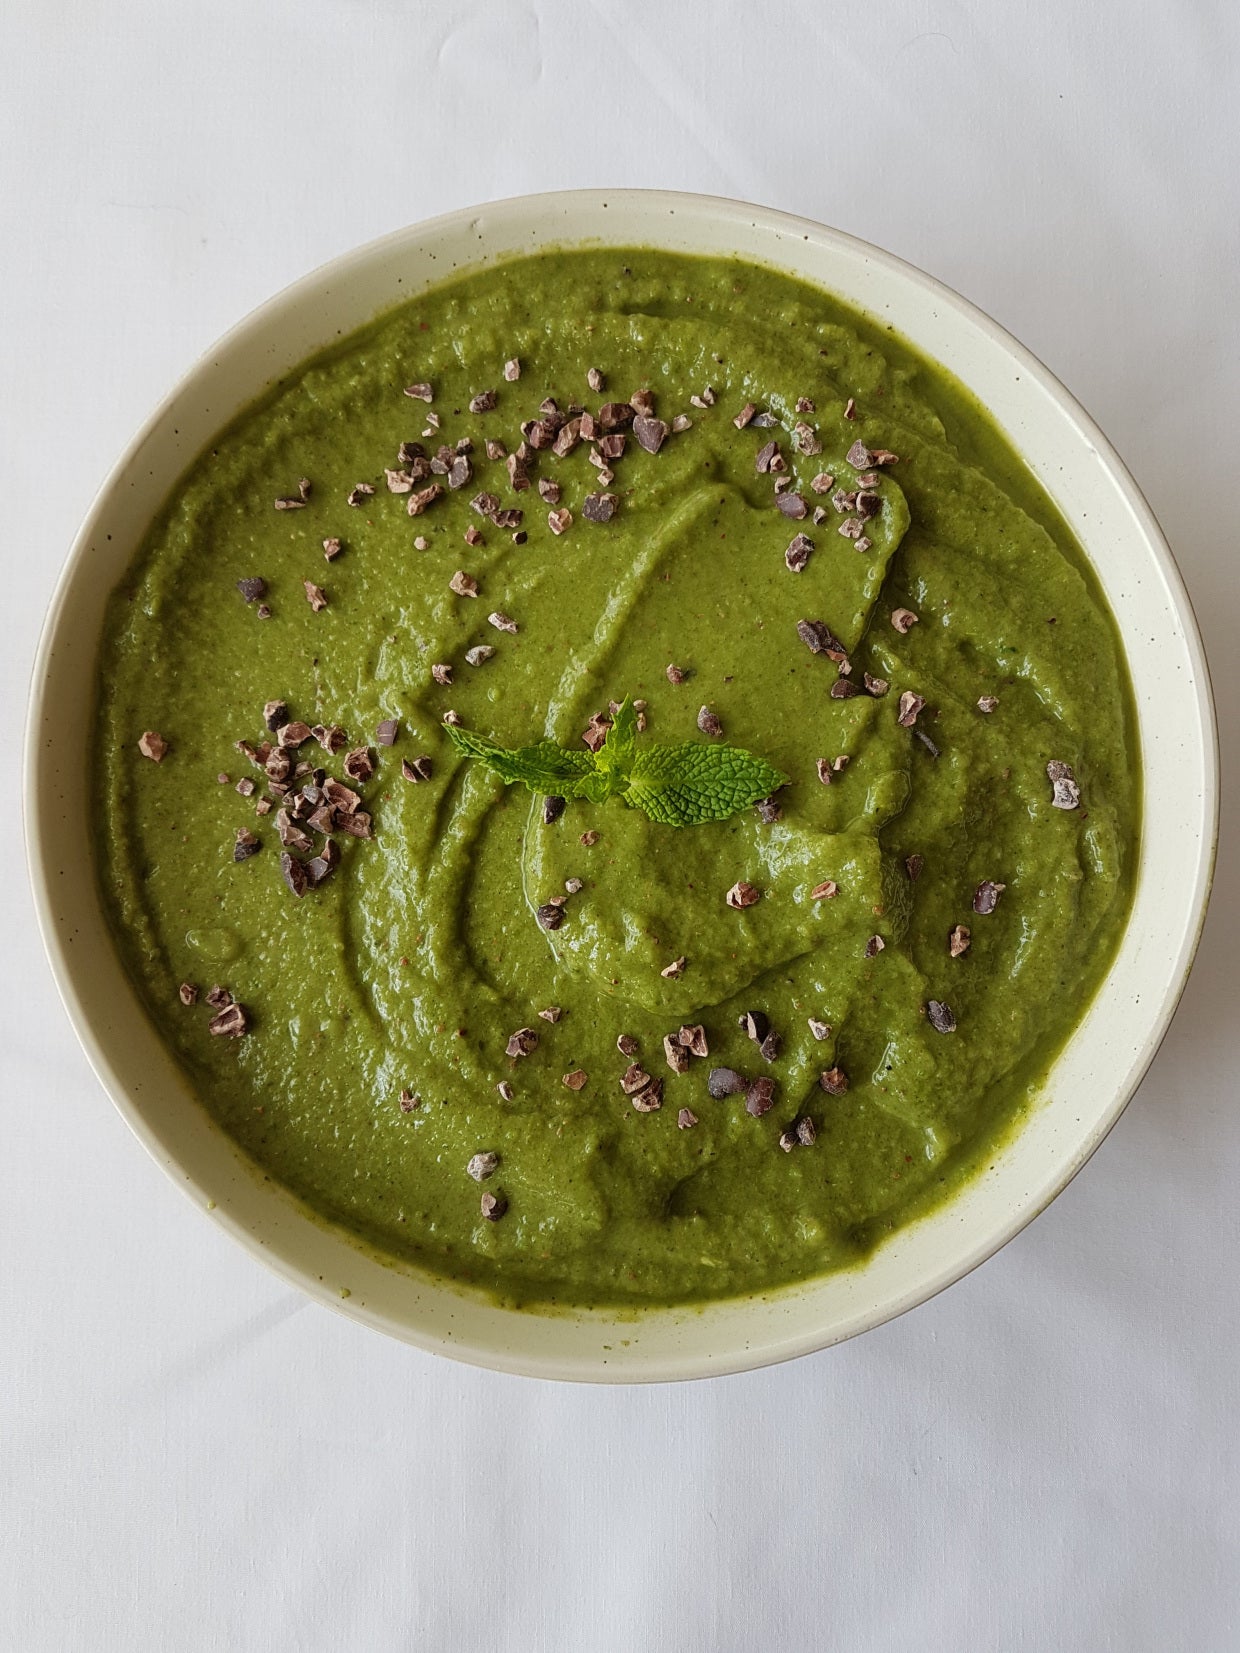 MINT CHIP SMOOTHIE BOWL